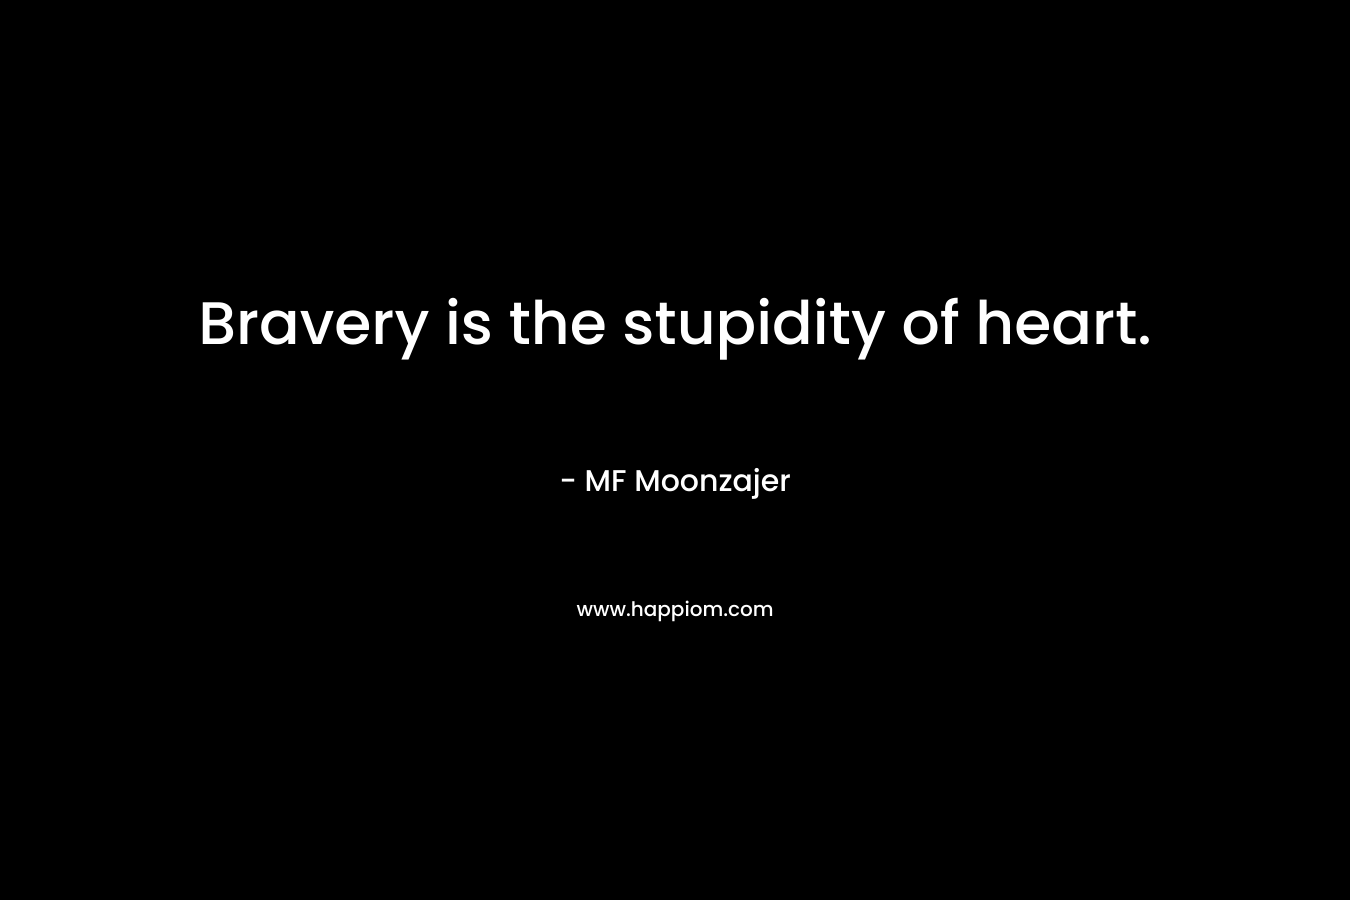 Bravery is the stupidity of heart.